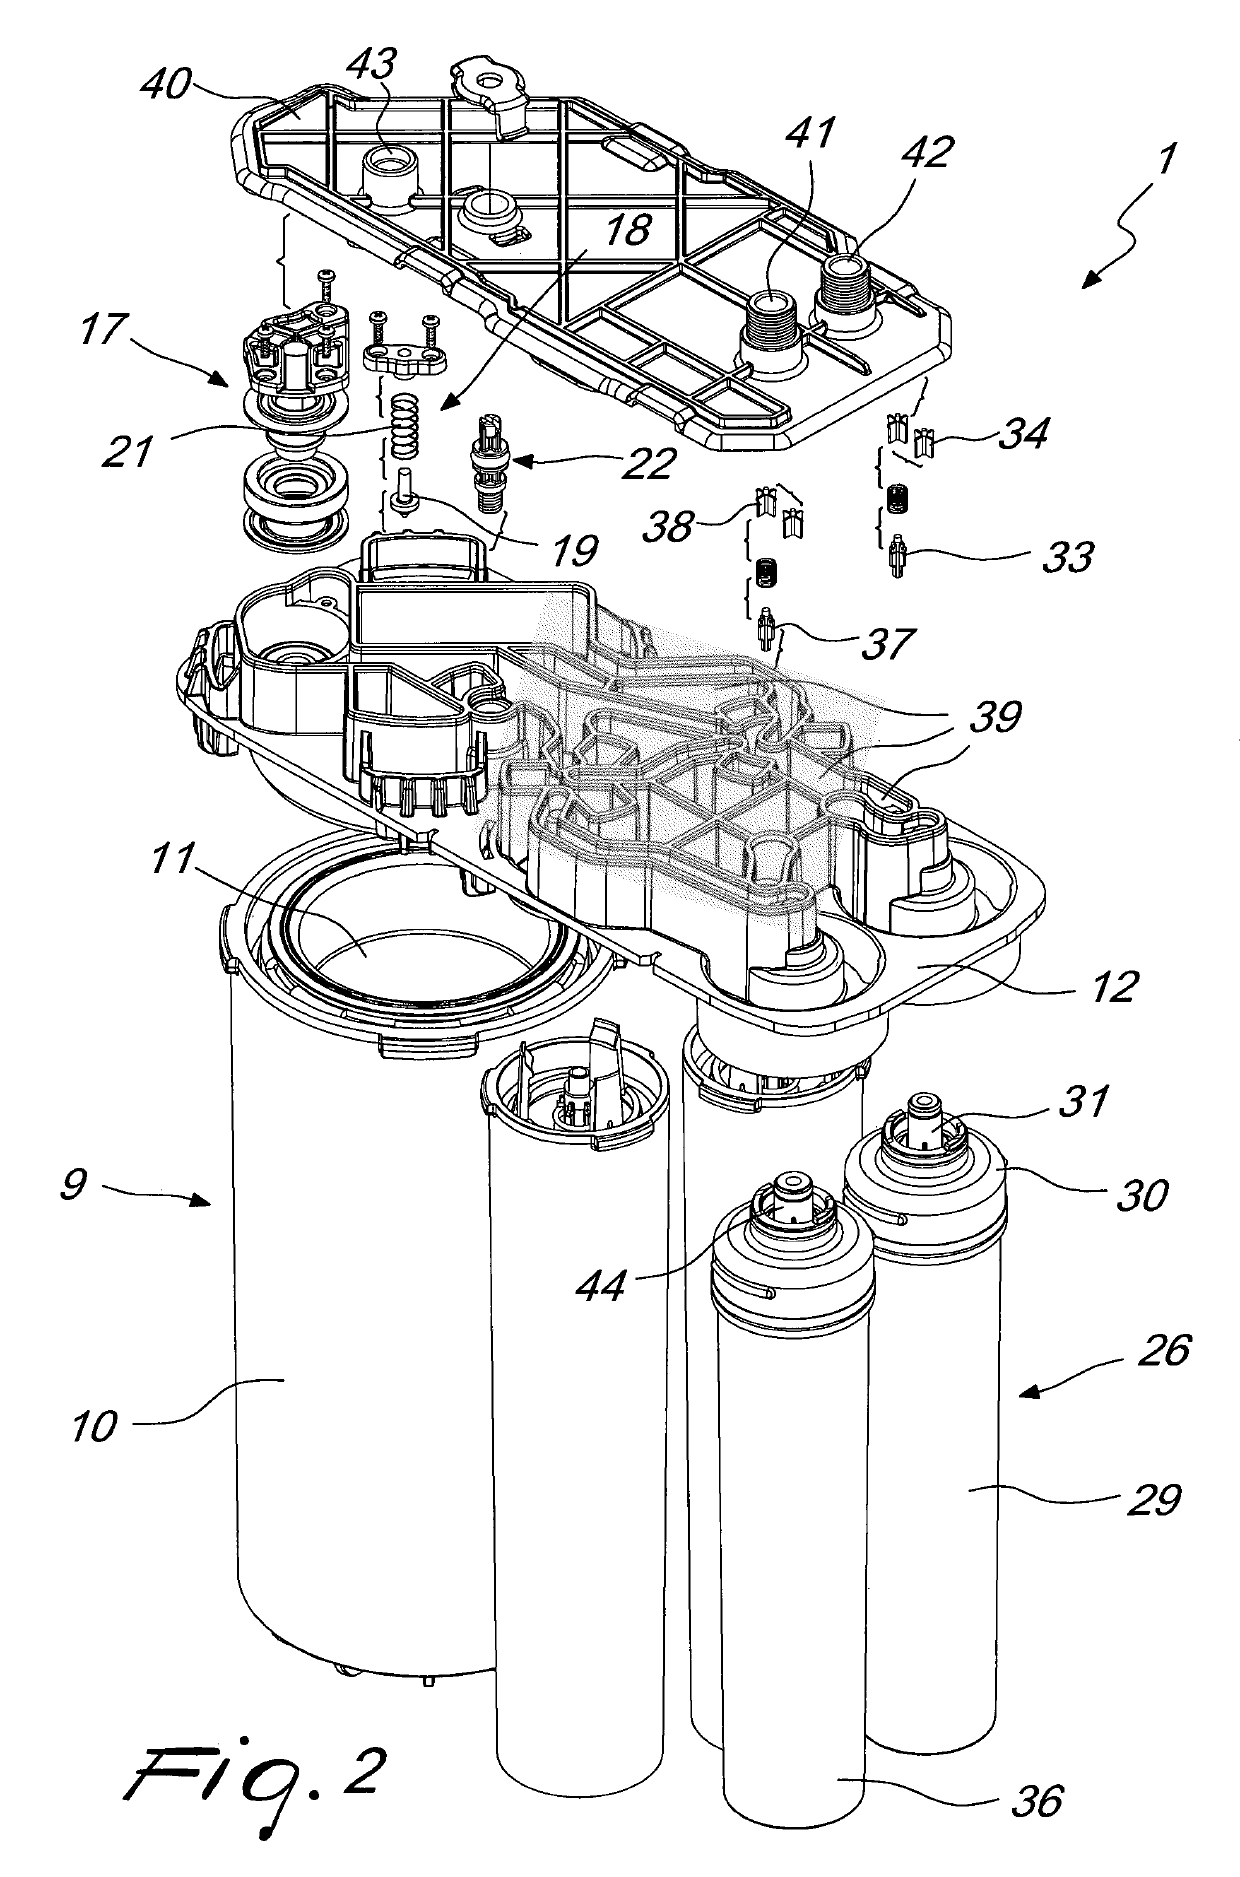 Apparatus for treating water or liquids in general